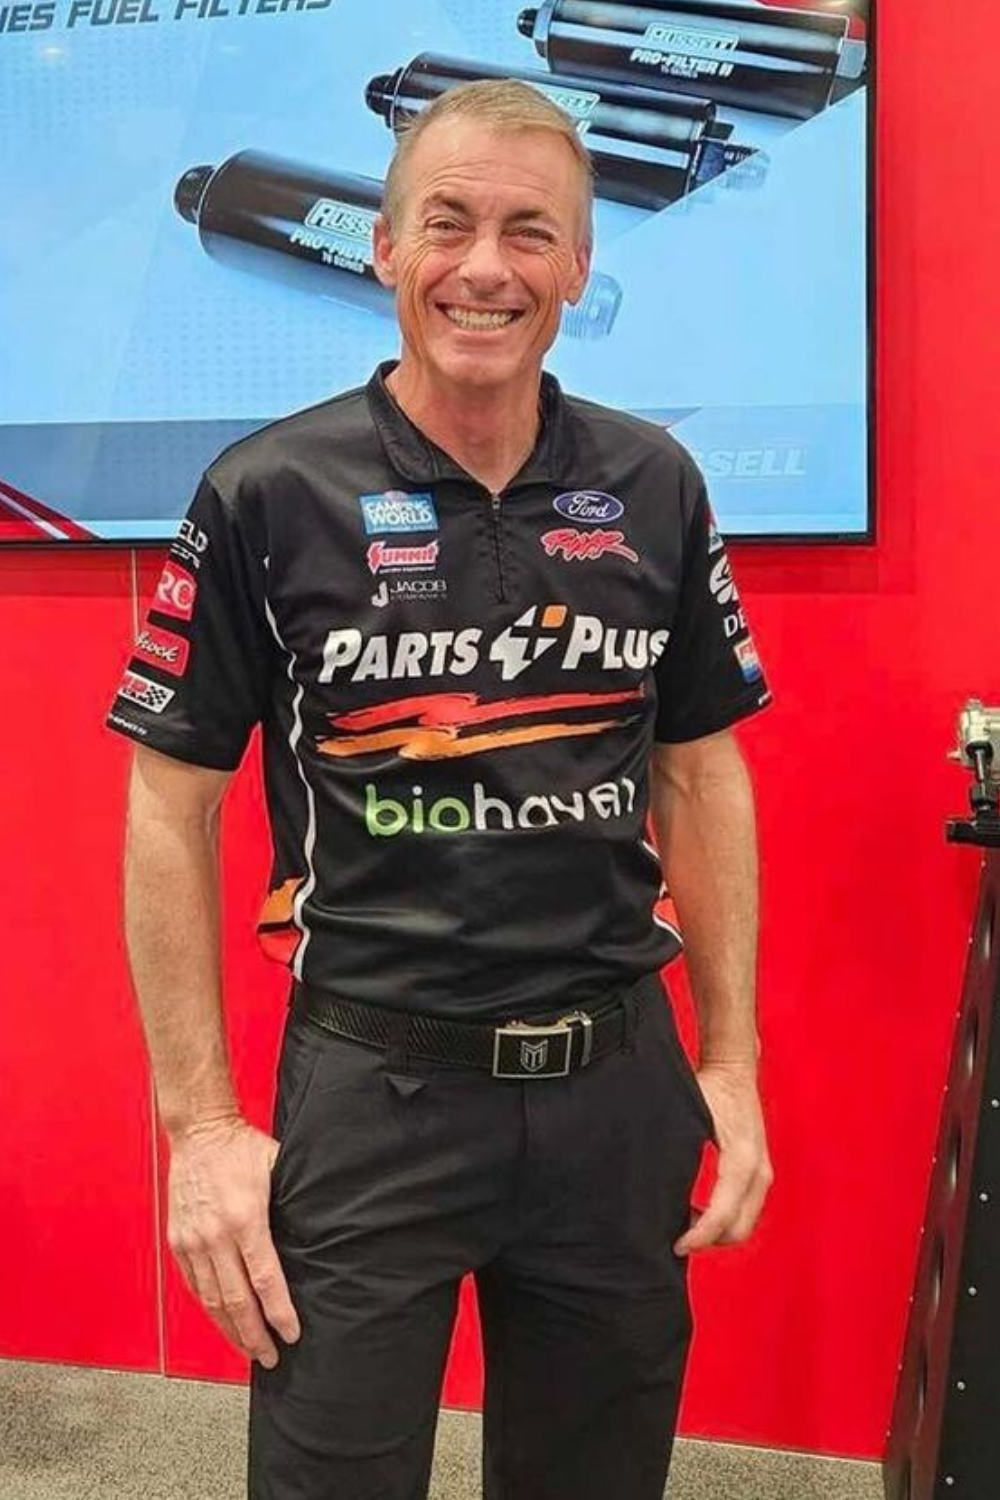 Clay Millican, Professional Top Fuel Nitro Dragster Driver, Currently Drives For NHRA